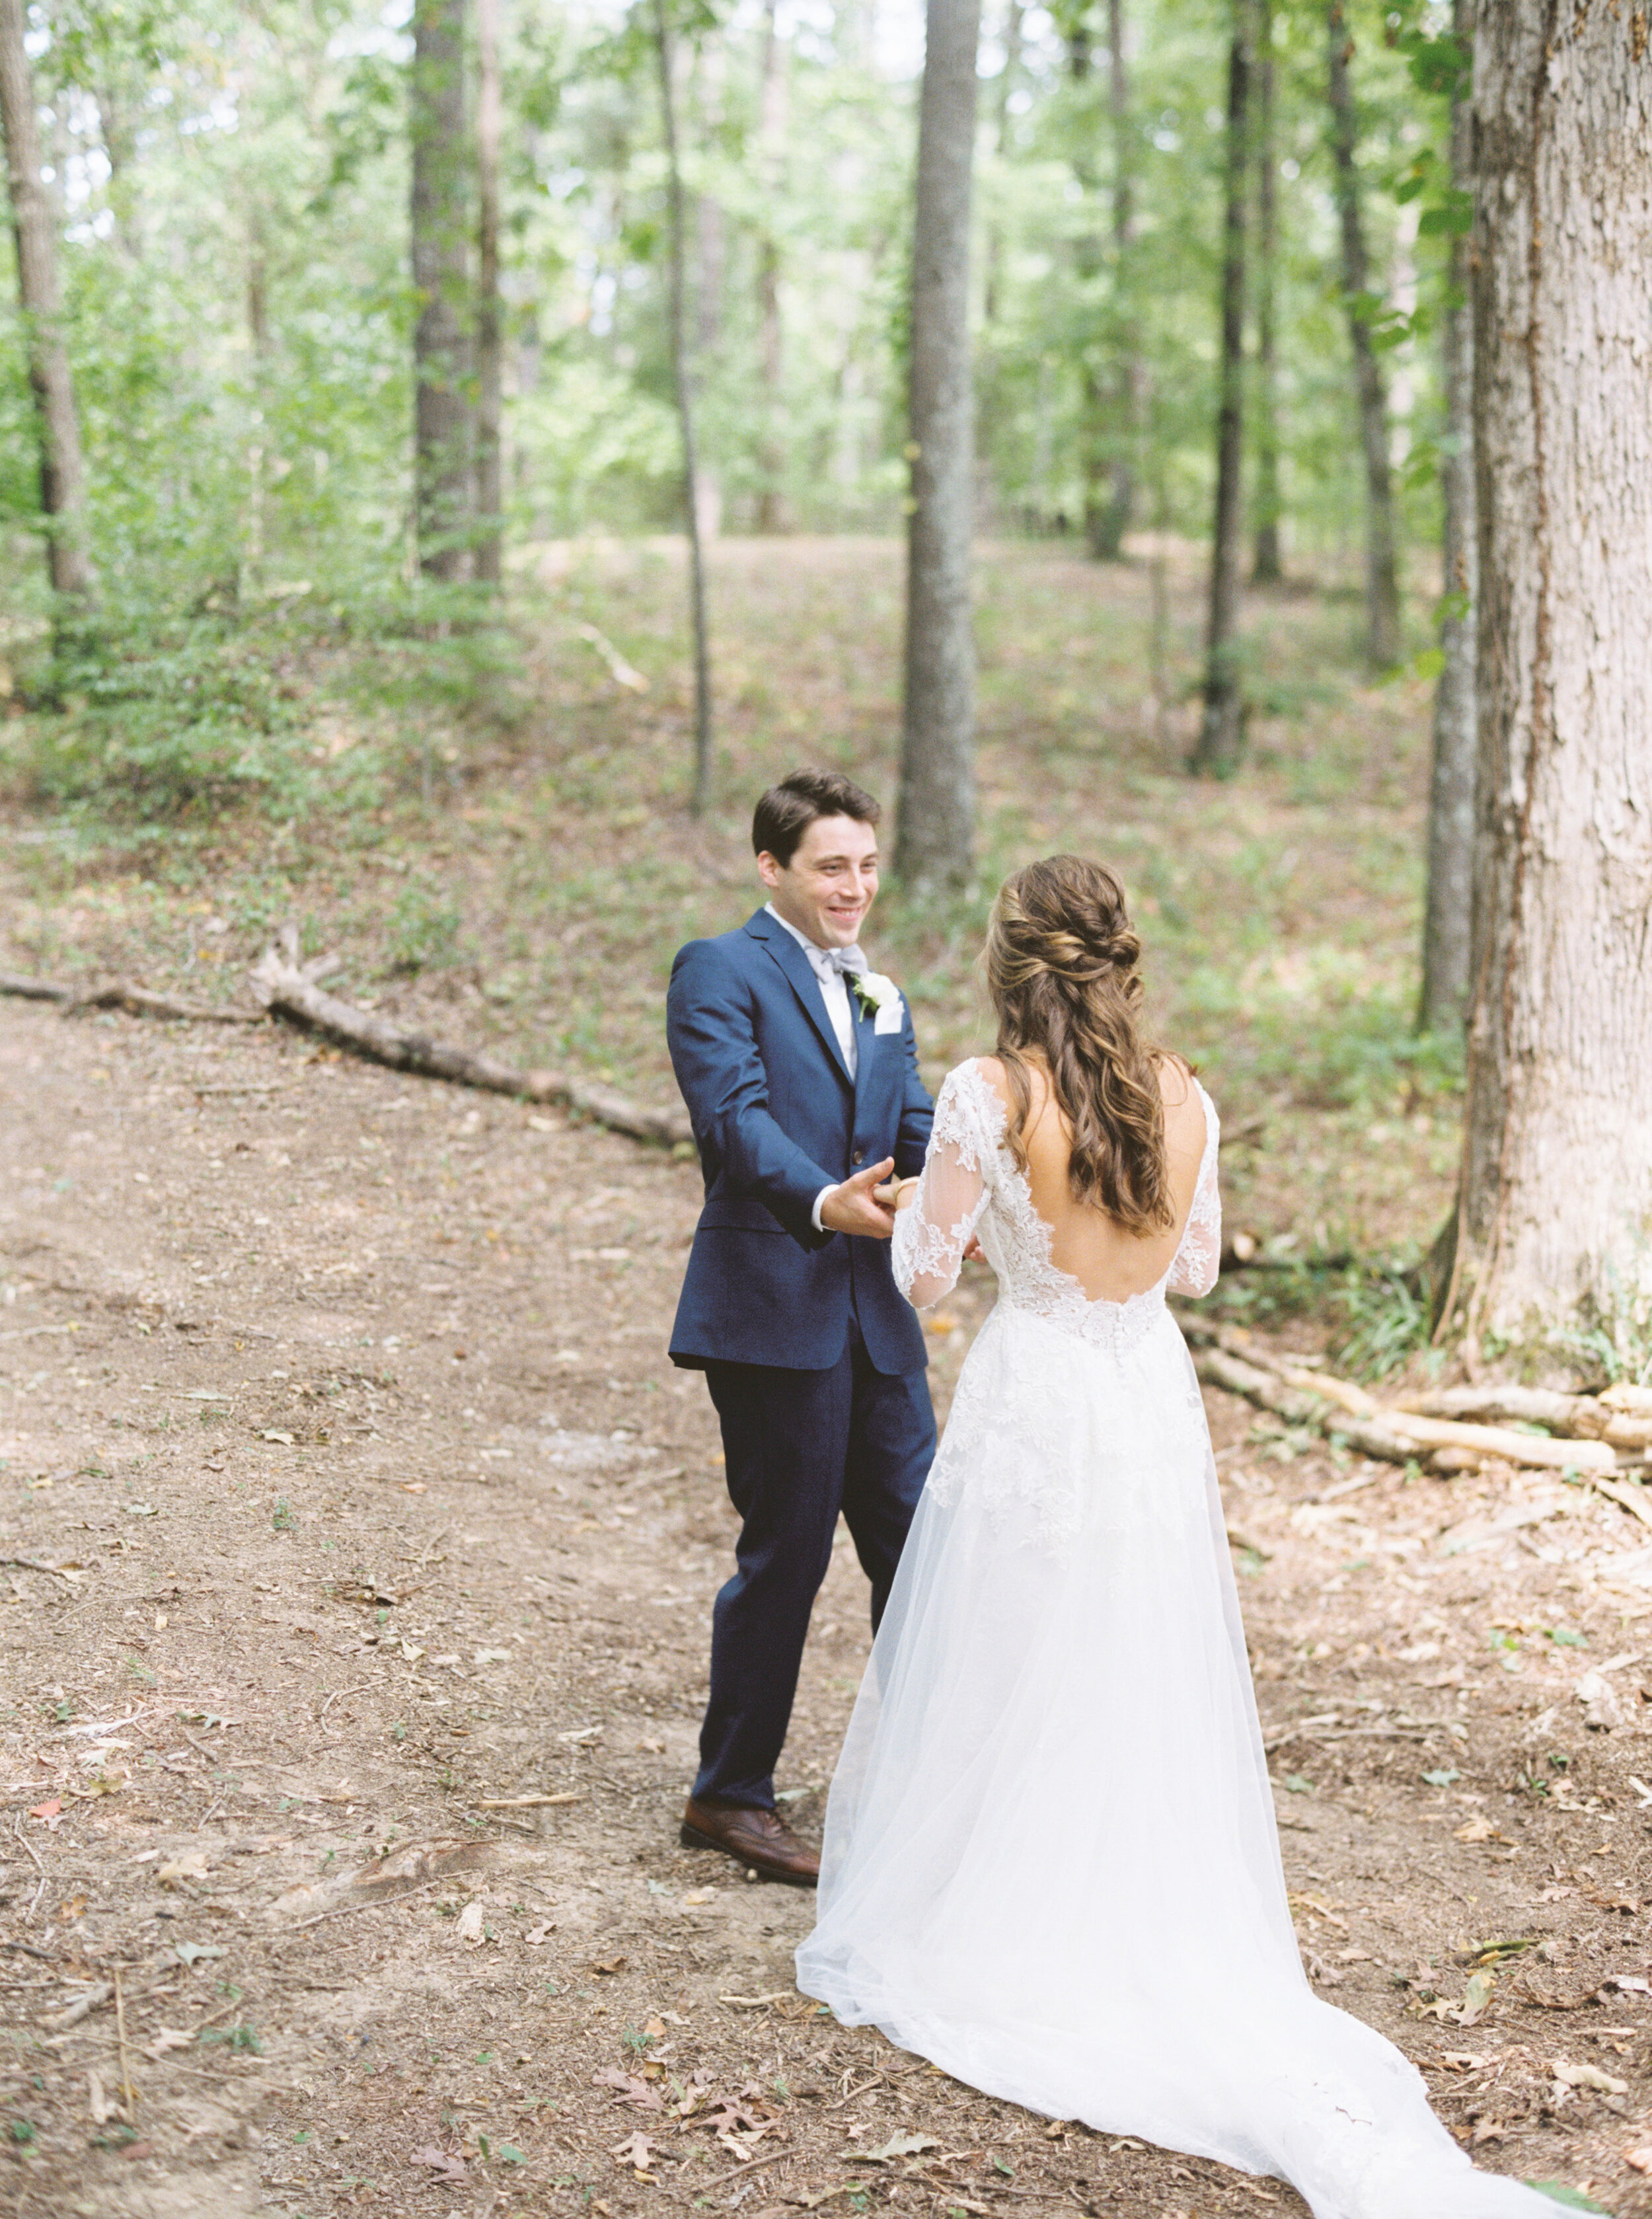 A Sentimental and Colorful Family Lake House Wedding in Shoal Creek ...